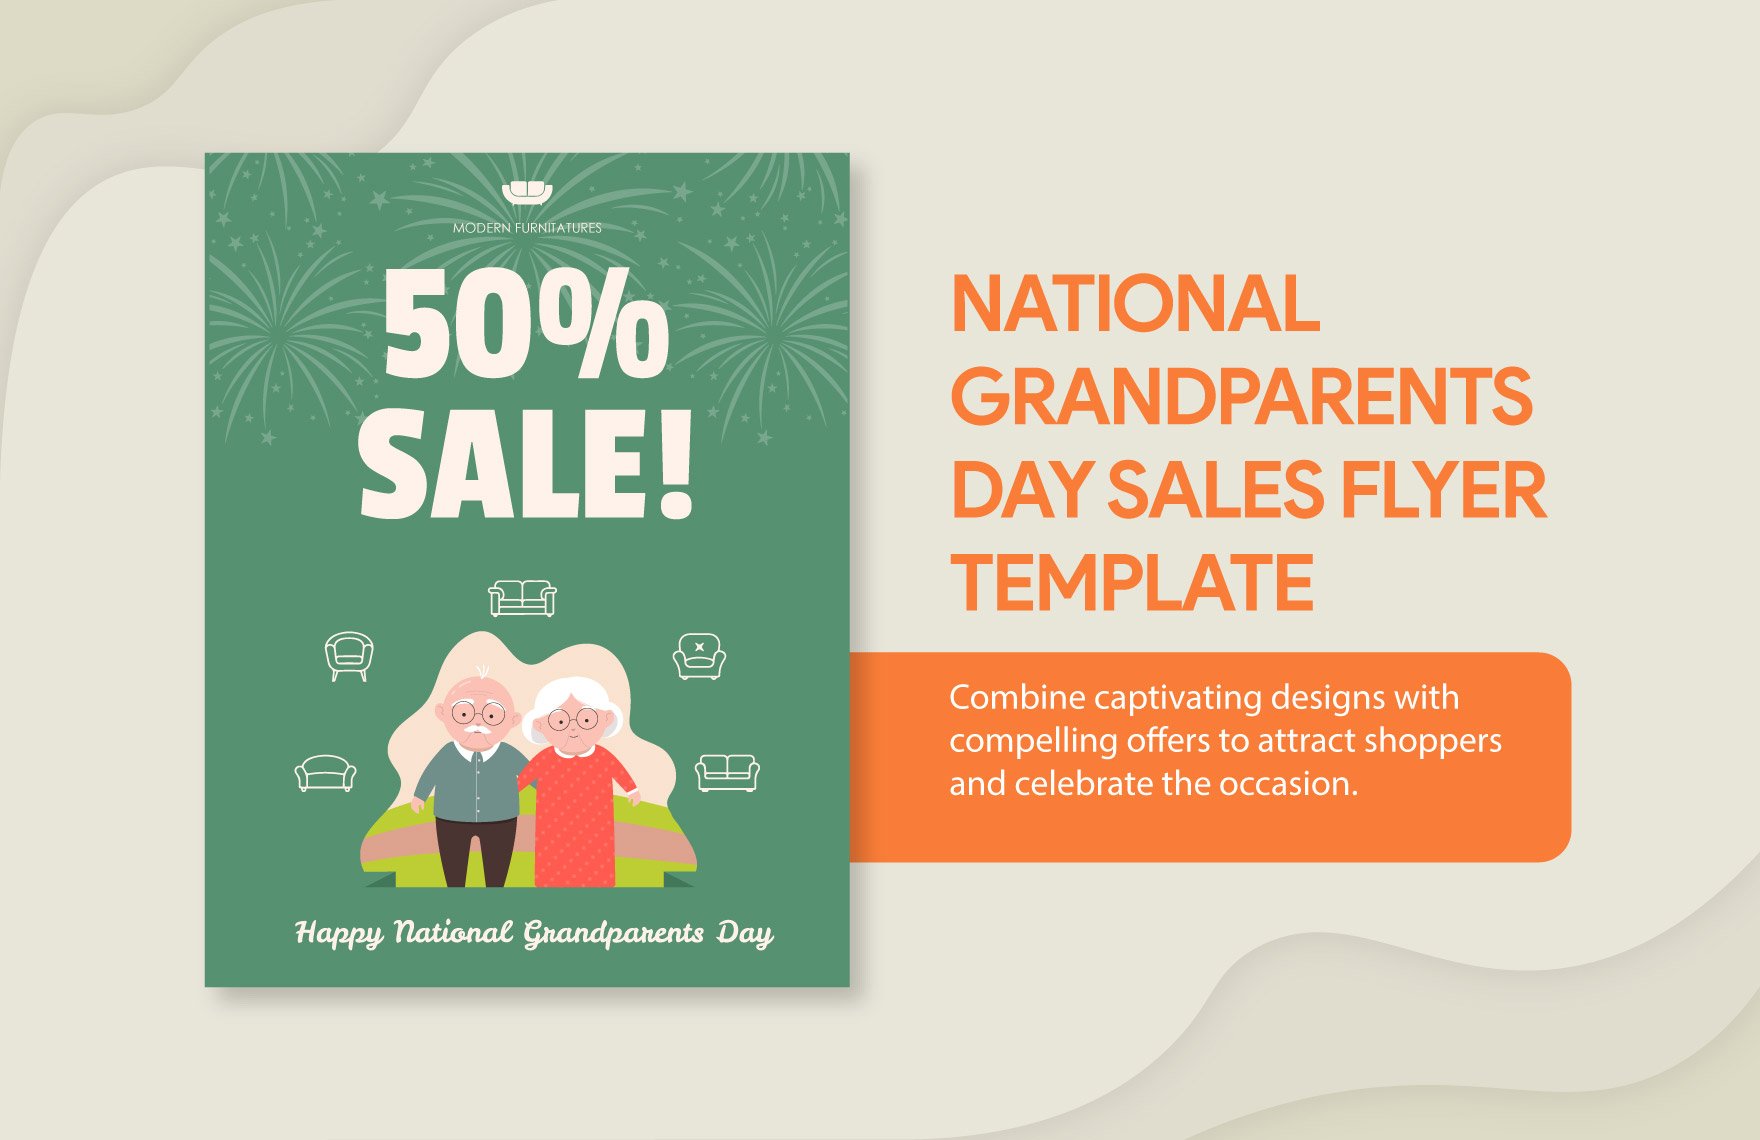 Free National Grandparents Day Sales Flyer Template in Illustrator, PSD, PNG